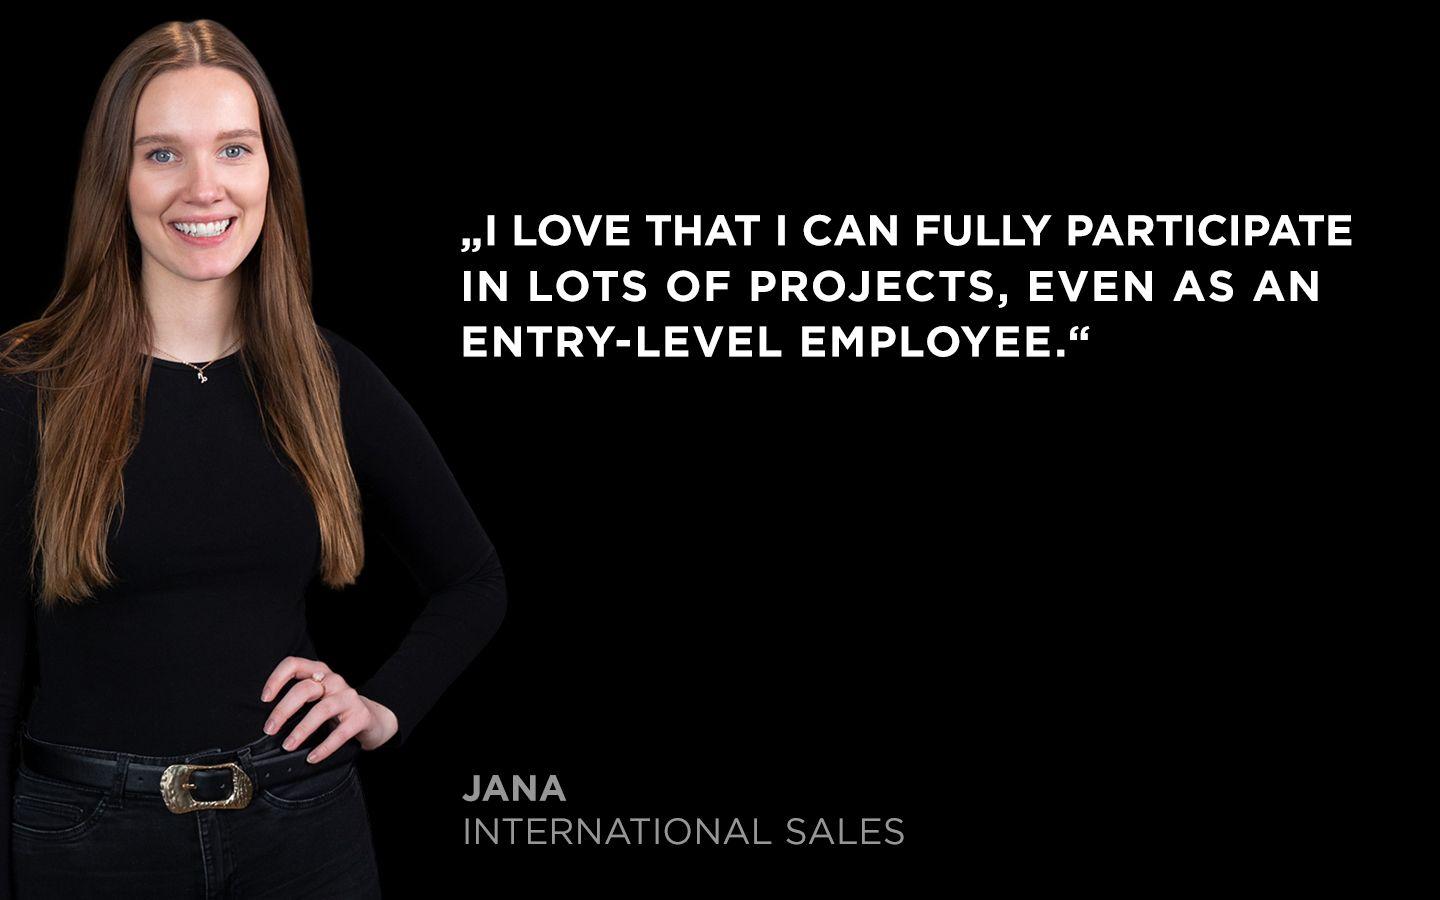 Quote from Jana from the International Sales team: What excites me about WAS Germany is that I can fully participate in lots of projects, even as an entry-level employee.